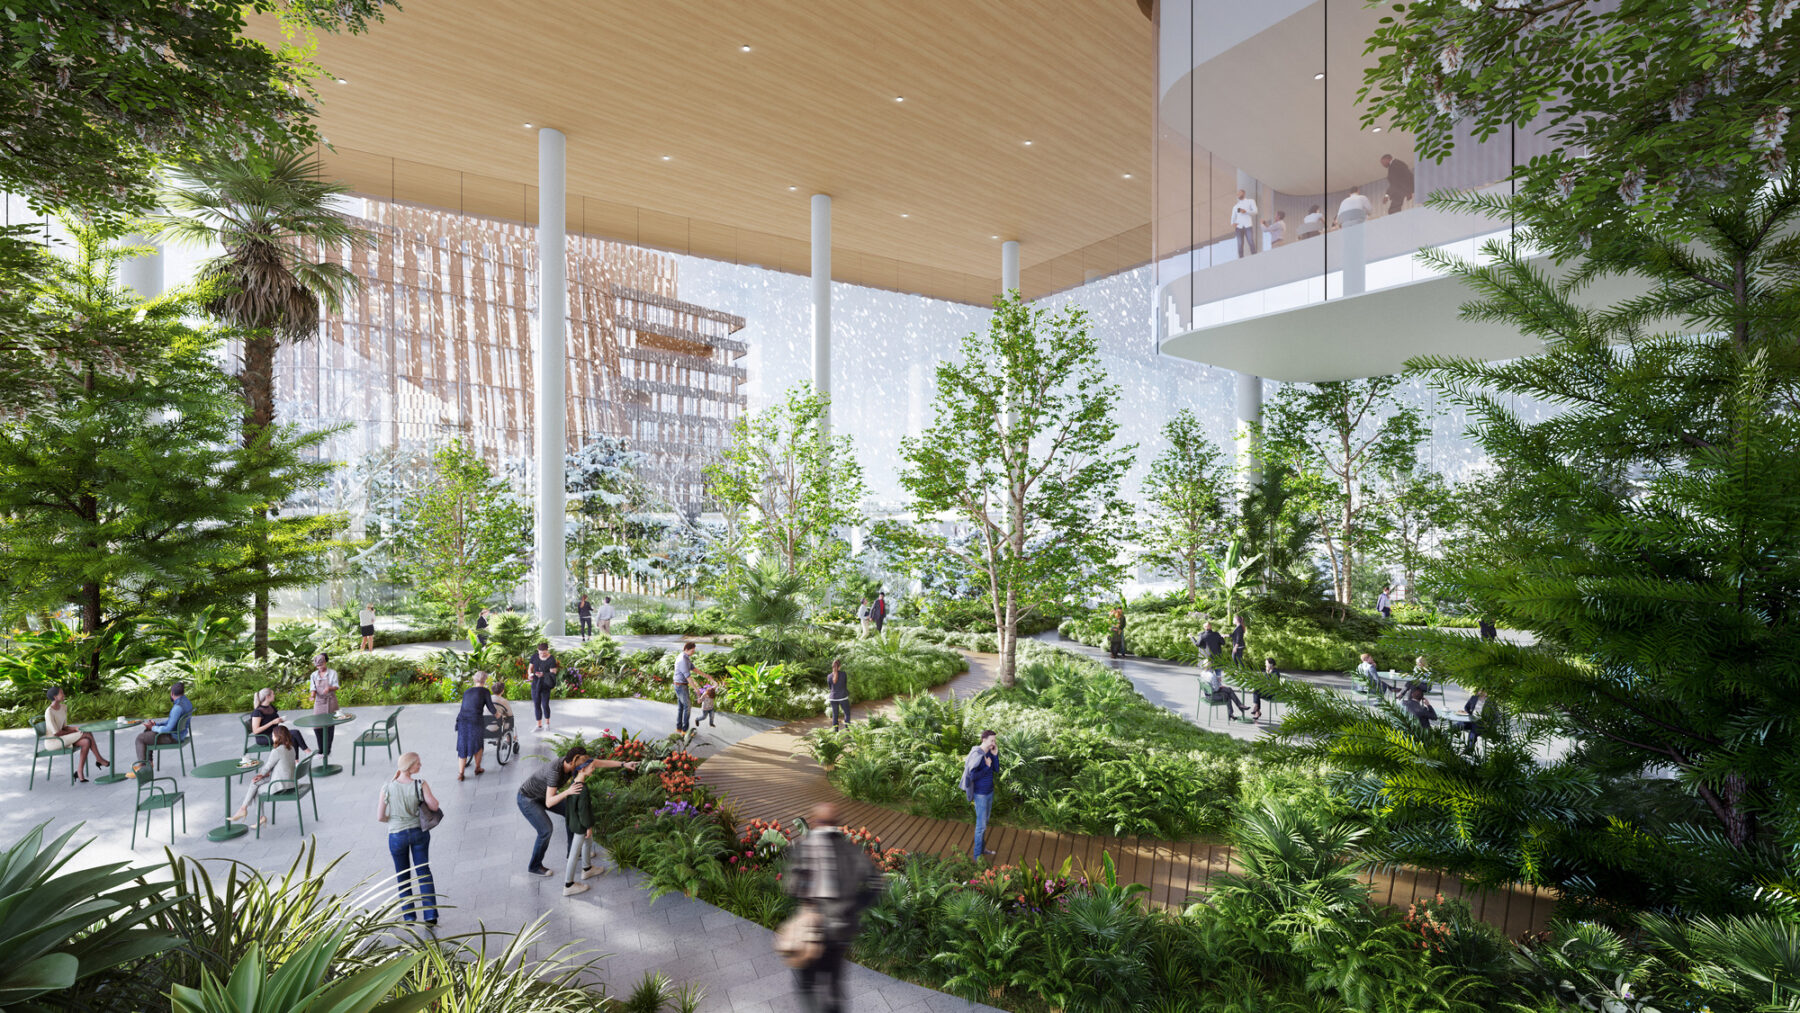 rendering of people walking along winding path of indoor winter garden featuring tropical plantings in a controlled climate